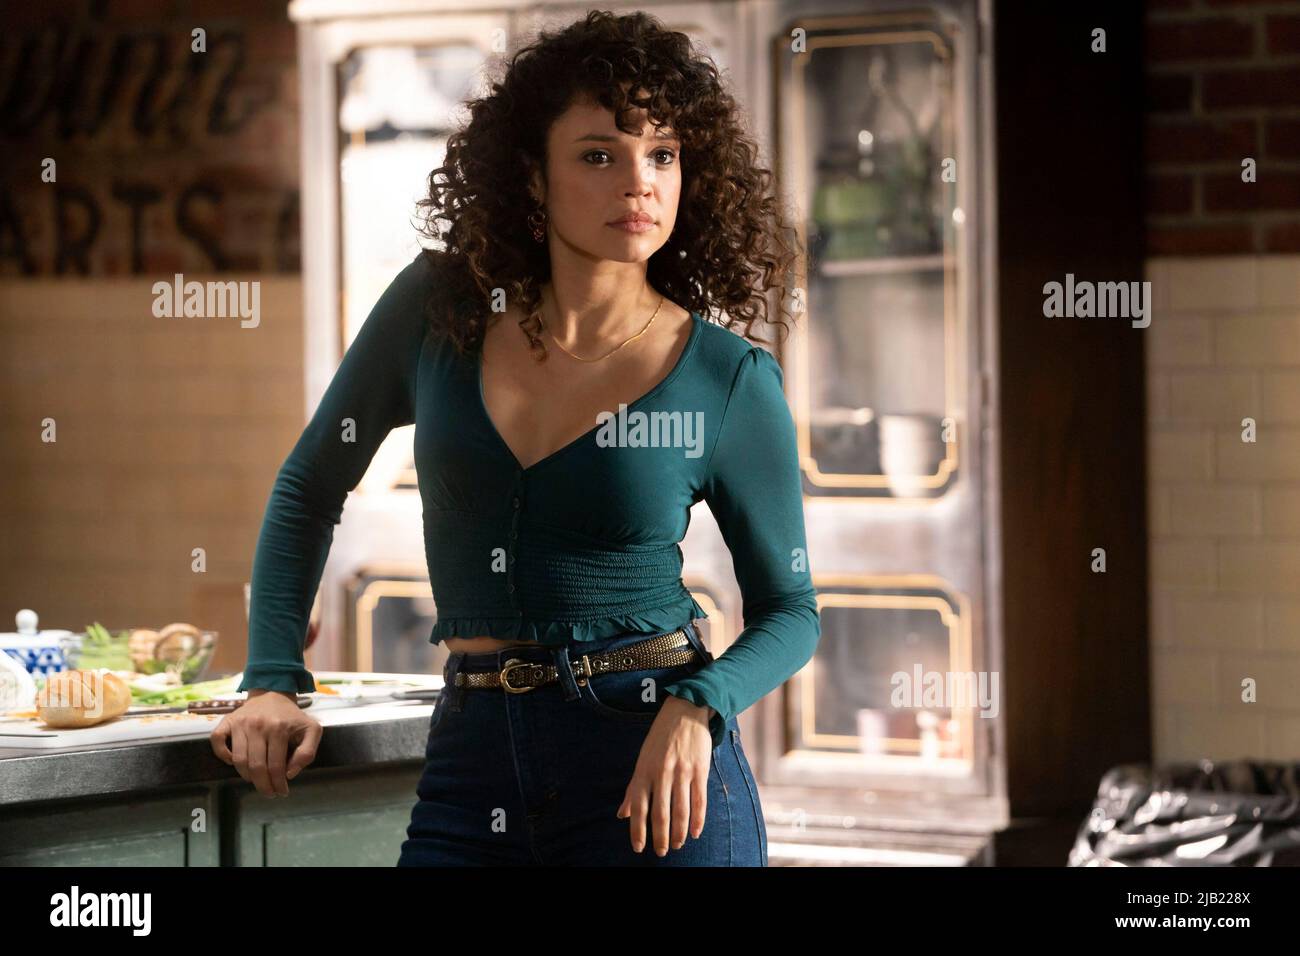 NATACHA LÓPEZ in THE TIME TRAVELER'S WIFE (2022), directed by DAVID NUTTER. Credit: WARNER BROS. TELEVISION / Album Stock Photo